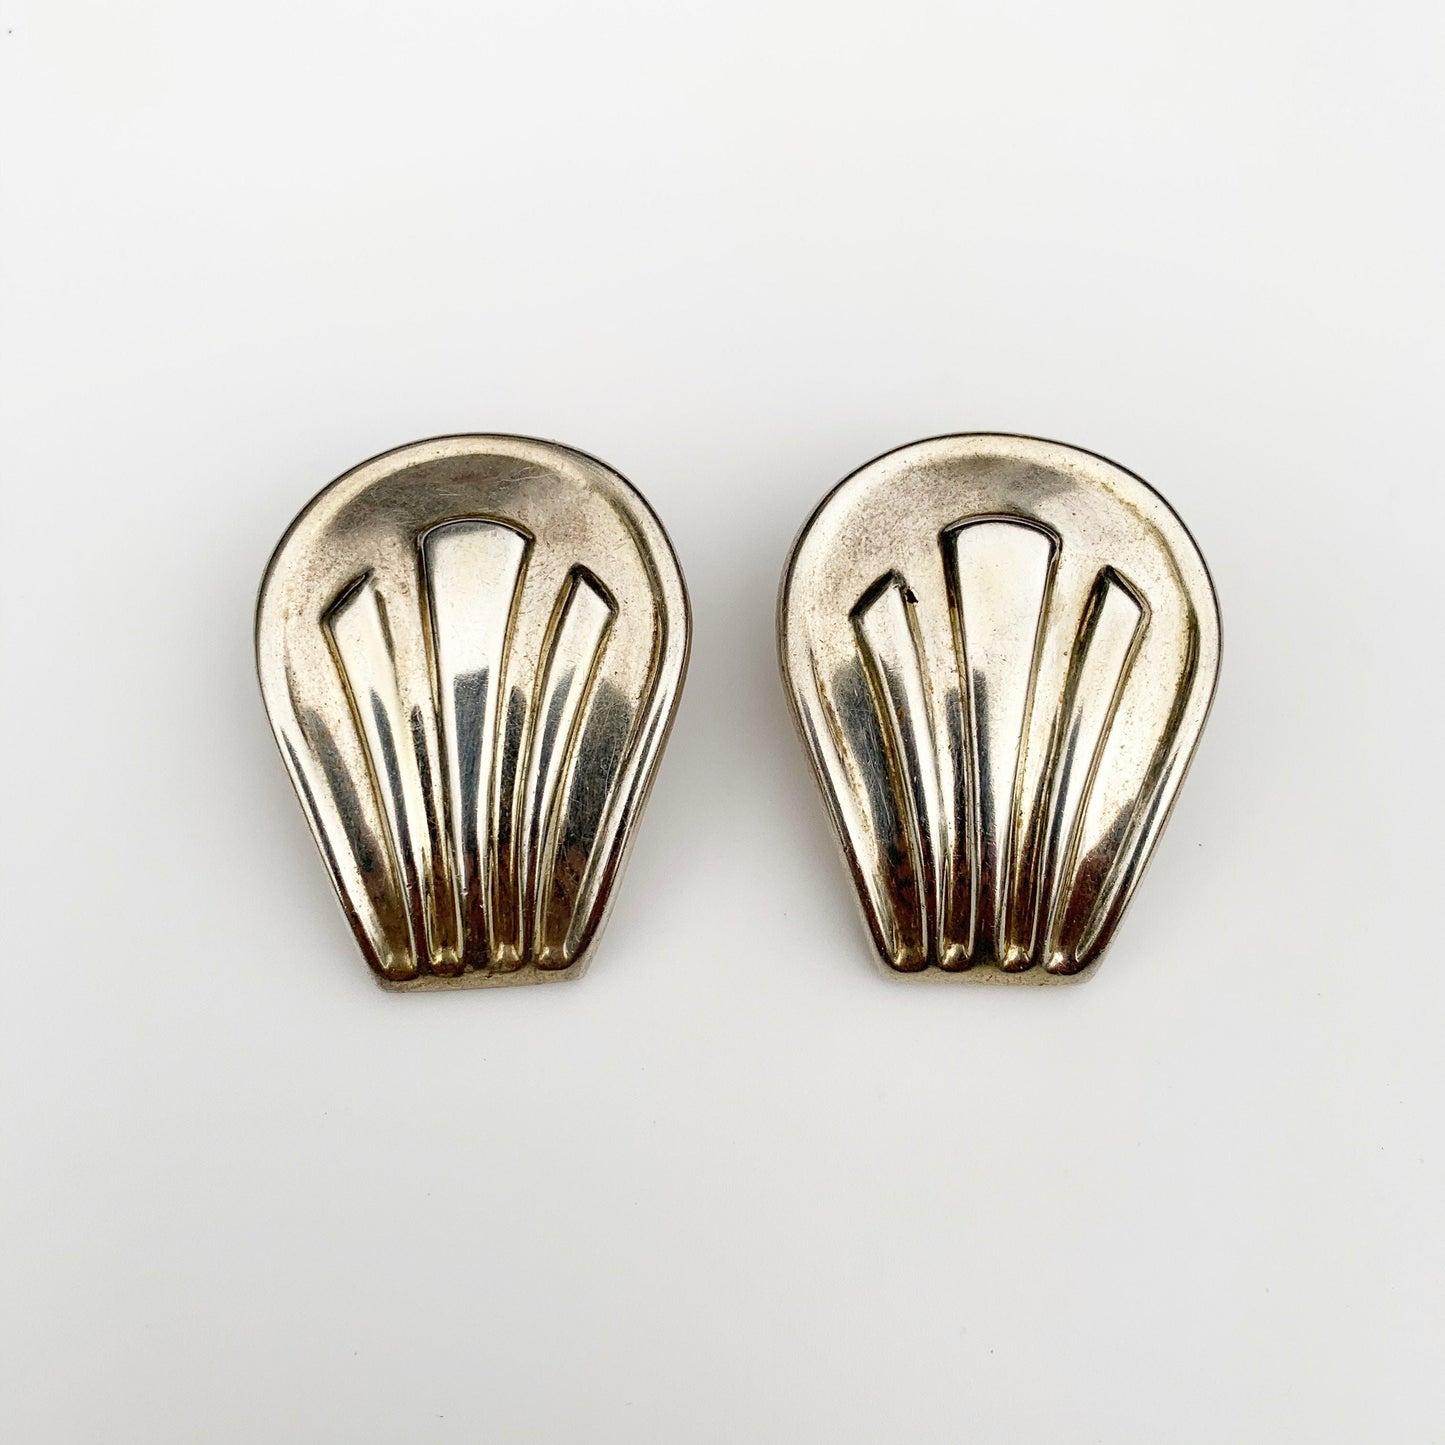 Vintage Mexican Silver Modernist Earrings | Modernist Repousse Earrings | Large Earrings